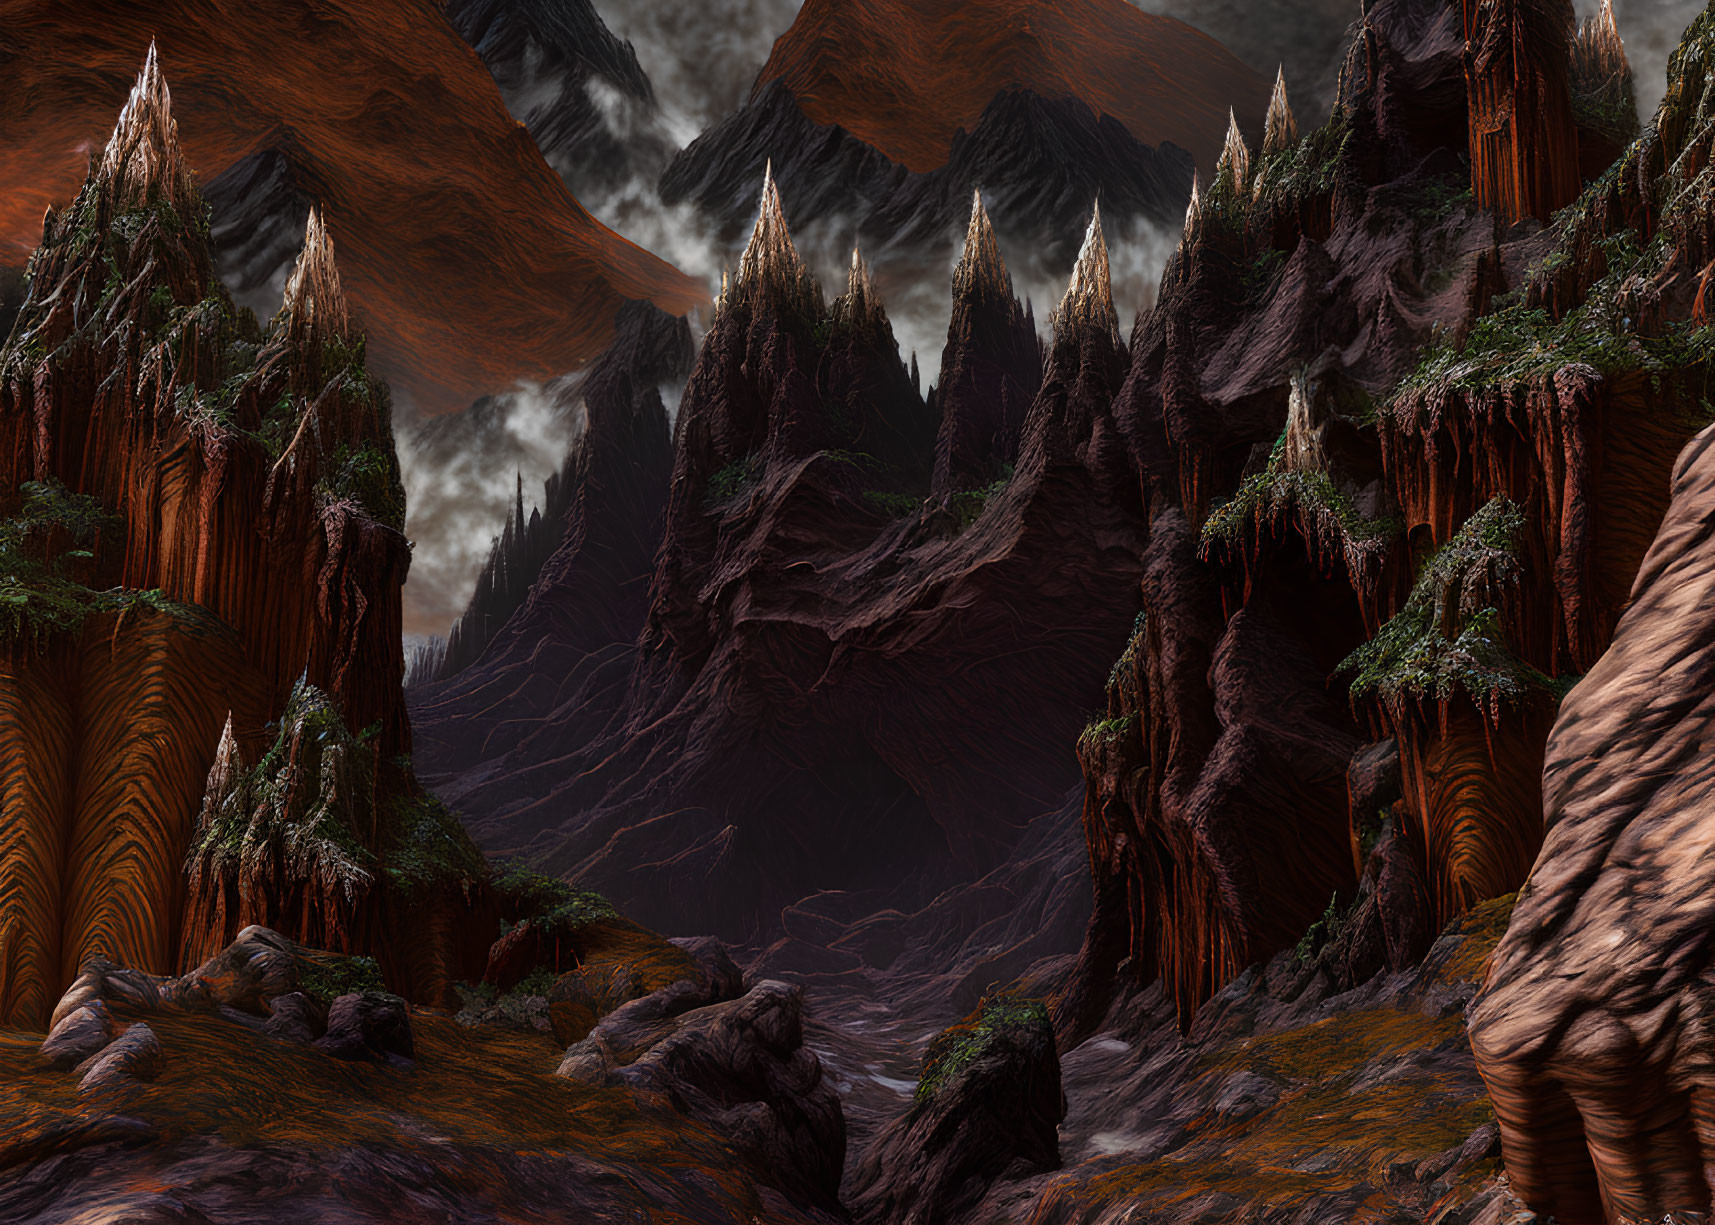 Dramatic landscape with towering mountains and copper-toned forests